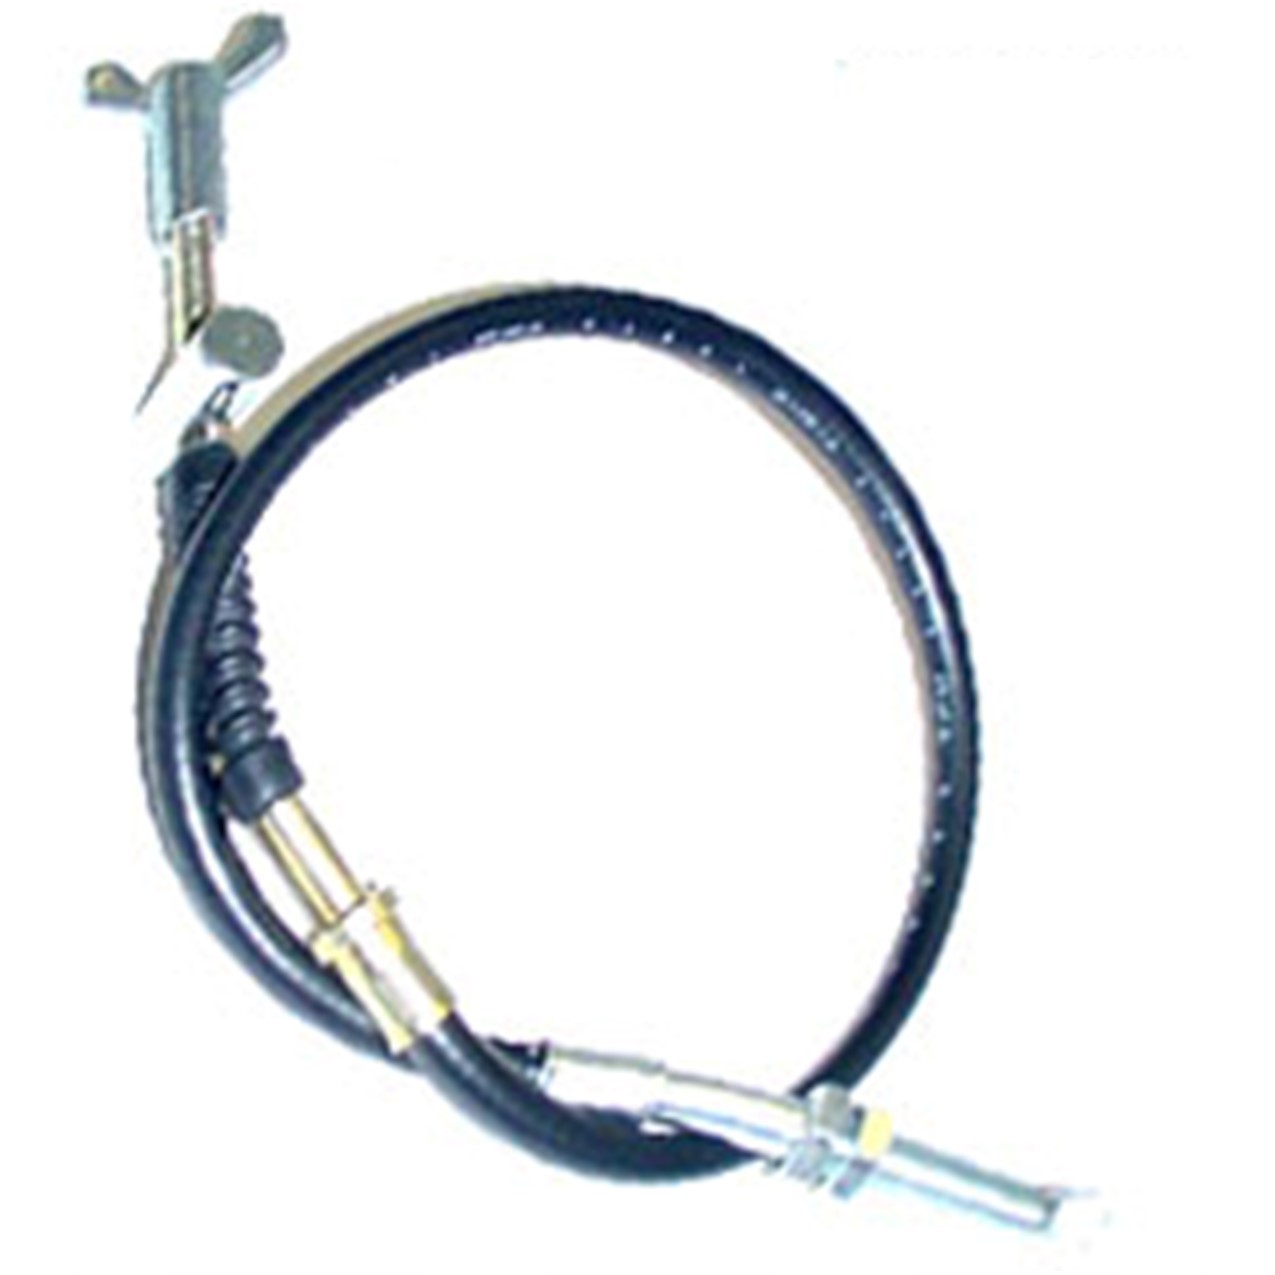 Foot Brake Cable Fits E-Ton Yukon YXL150, CXL150, Viper RXL150R, ATVs + Others Out=19"/Inner Wire=24"